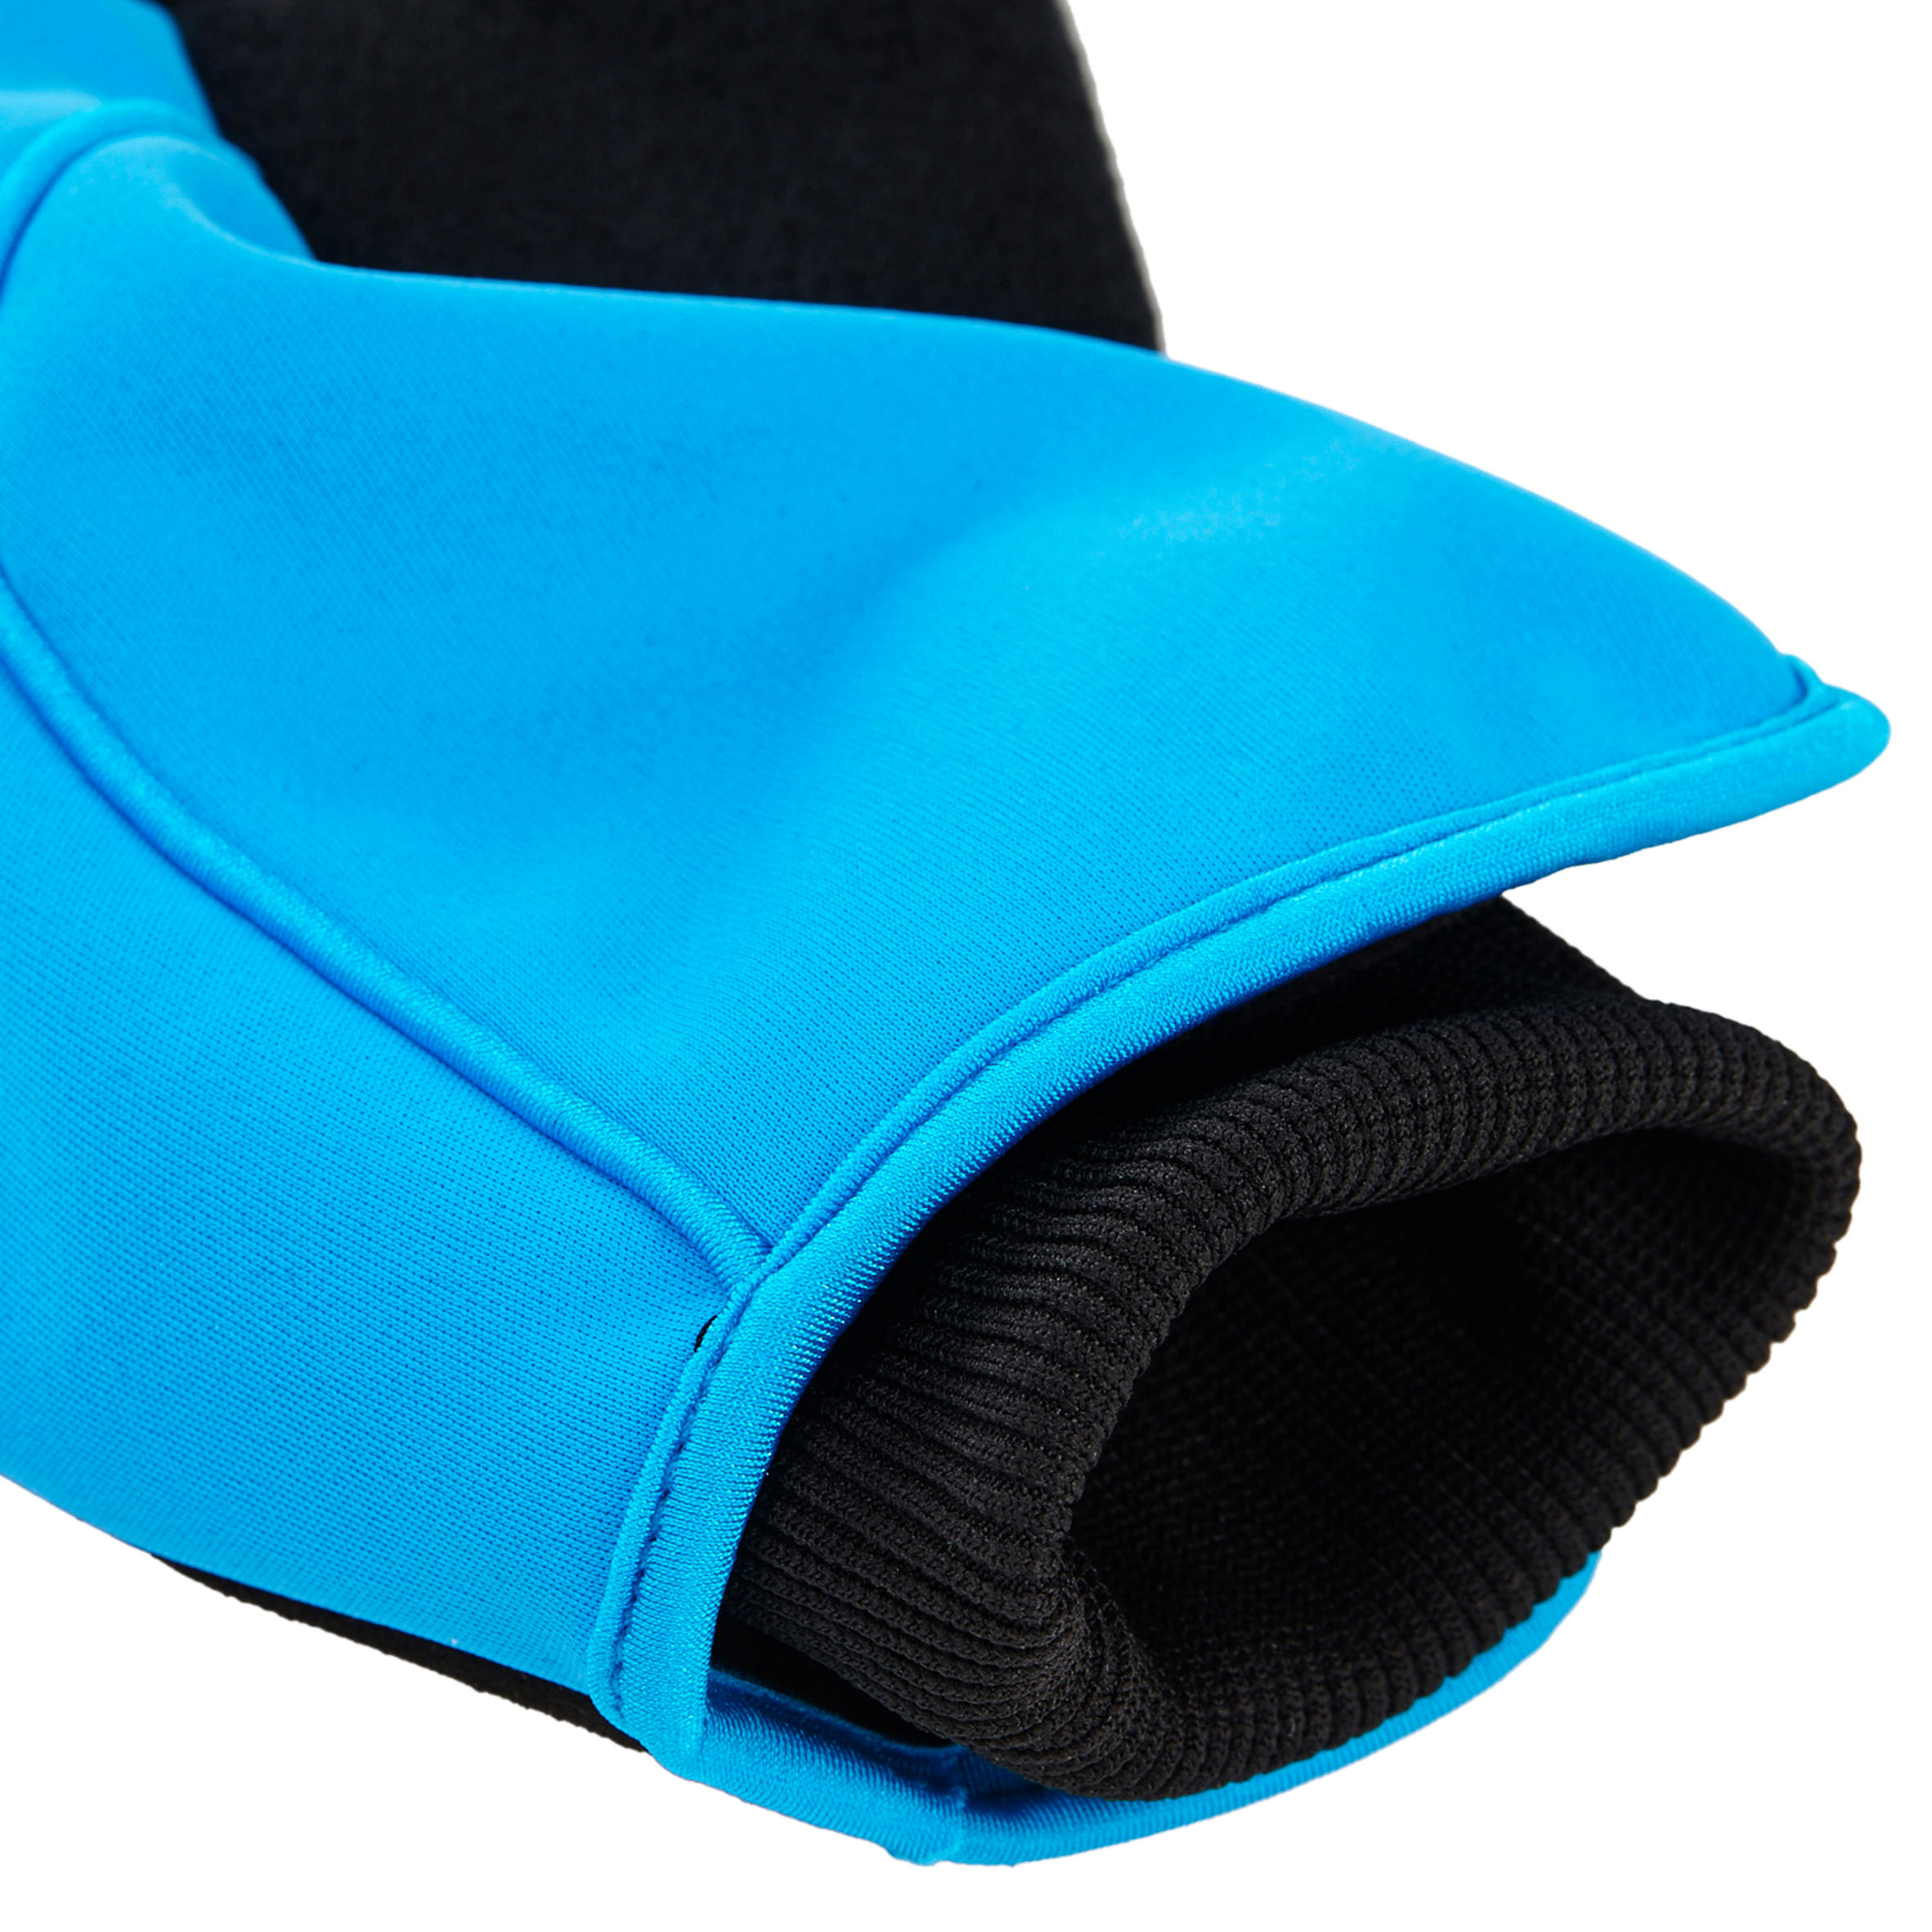 500 Winter Cycling Gloves - Blue 6/10